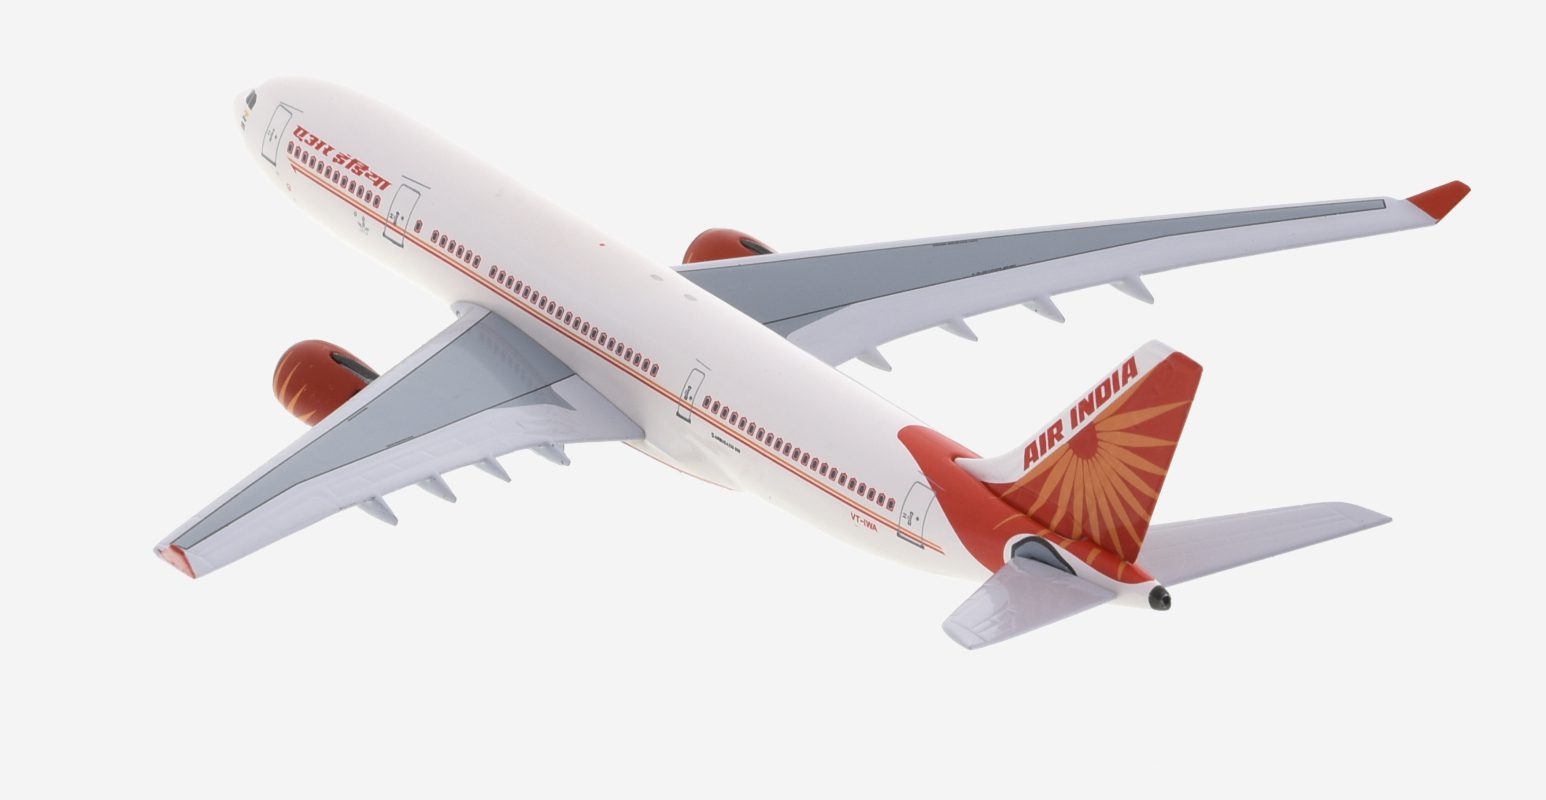 Top view of Aero Classic AC419827- 1/400 scale diecast model of the Airbus A330-200, registration VT-IWA, in the livery of Air India circa 2008